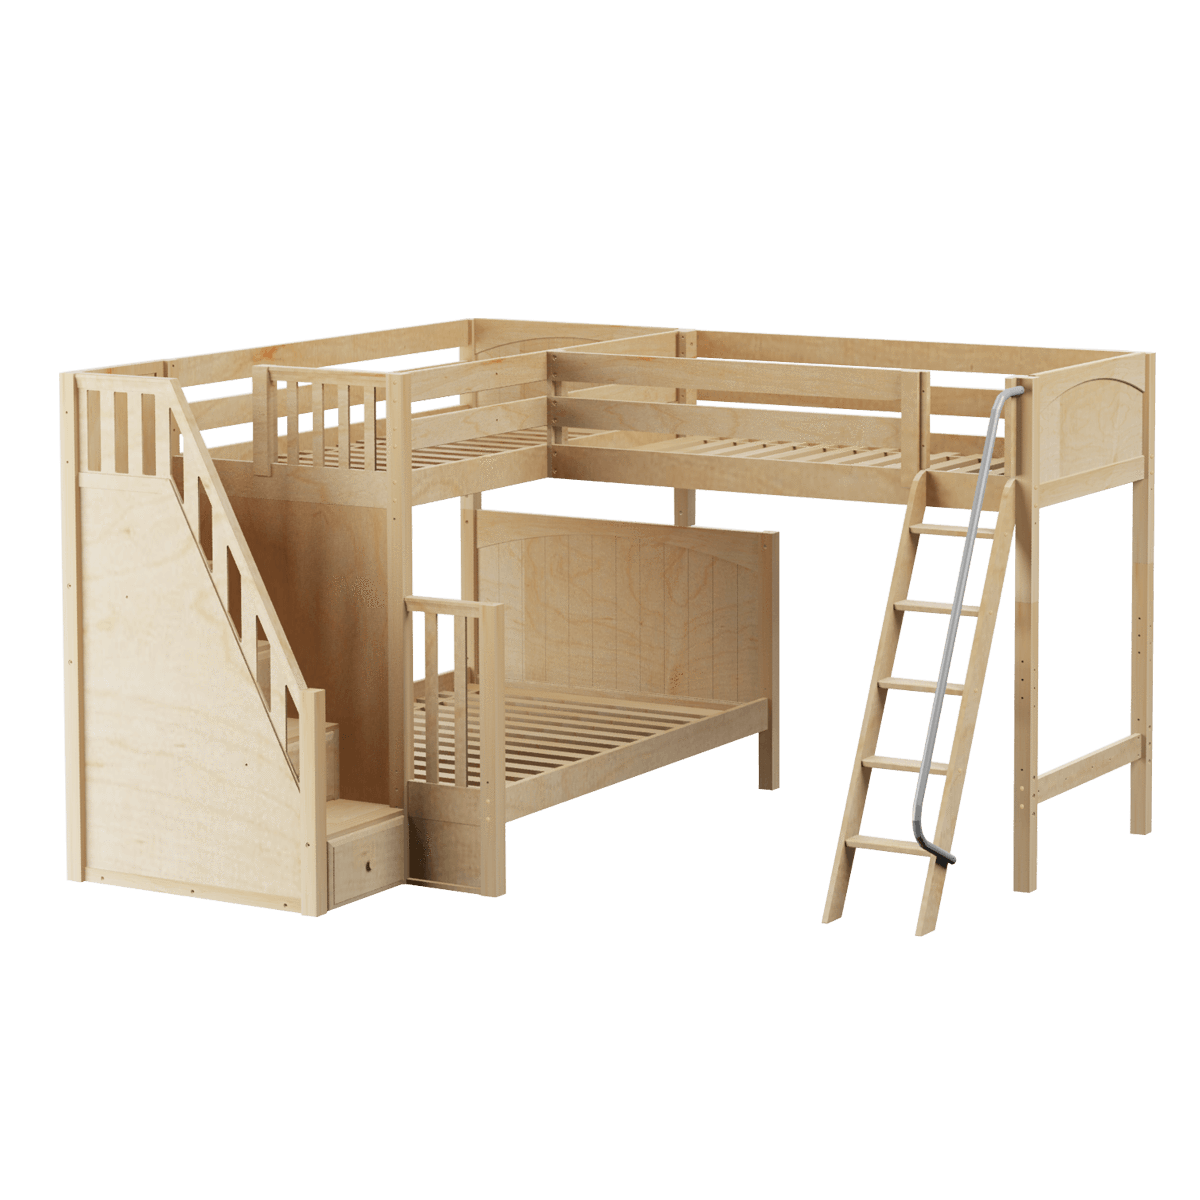 Maxtrix High Twin over Full Corner Loft Bunk Bed with Ladder + Stairs